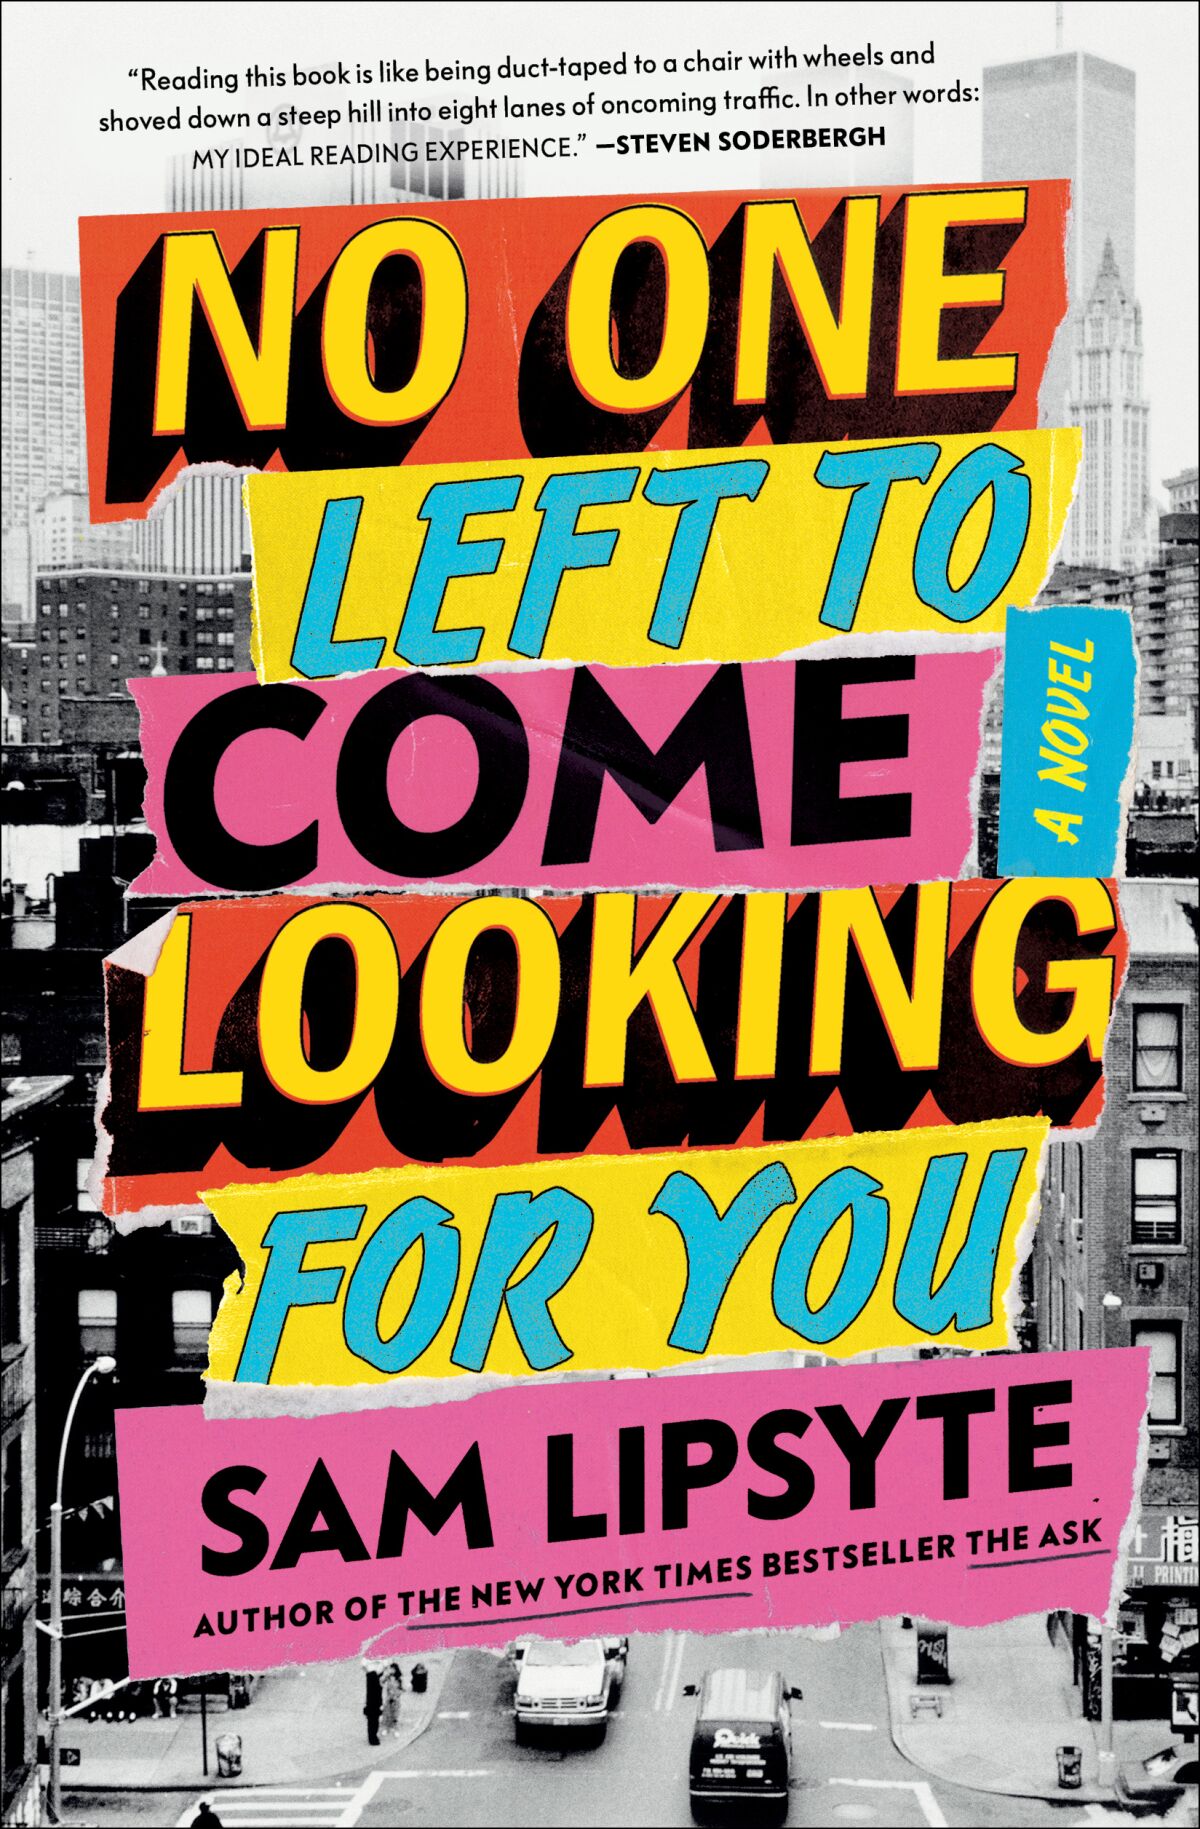 "No One Left to Come Looking for You," by Sam Lipsyte